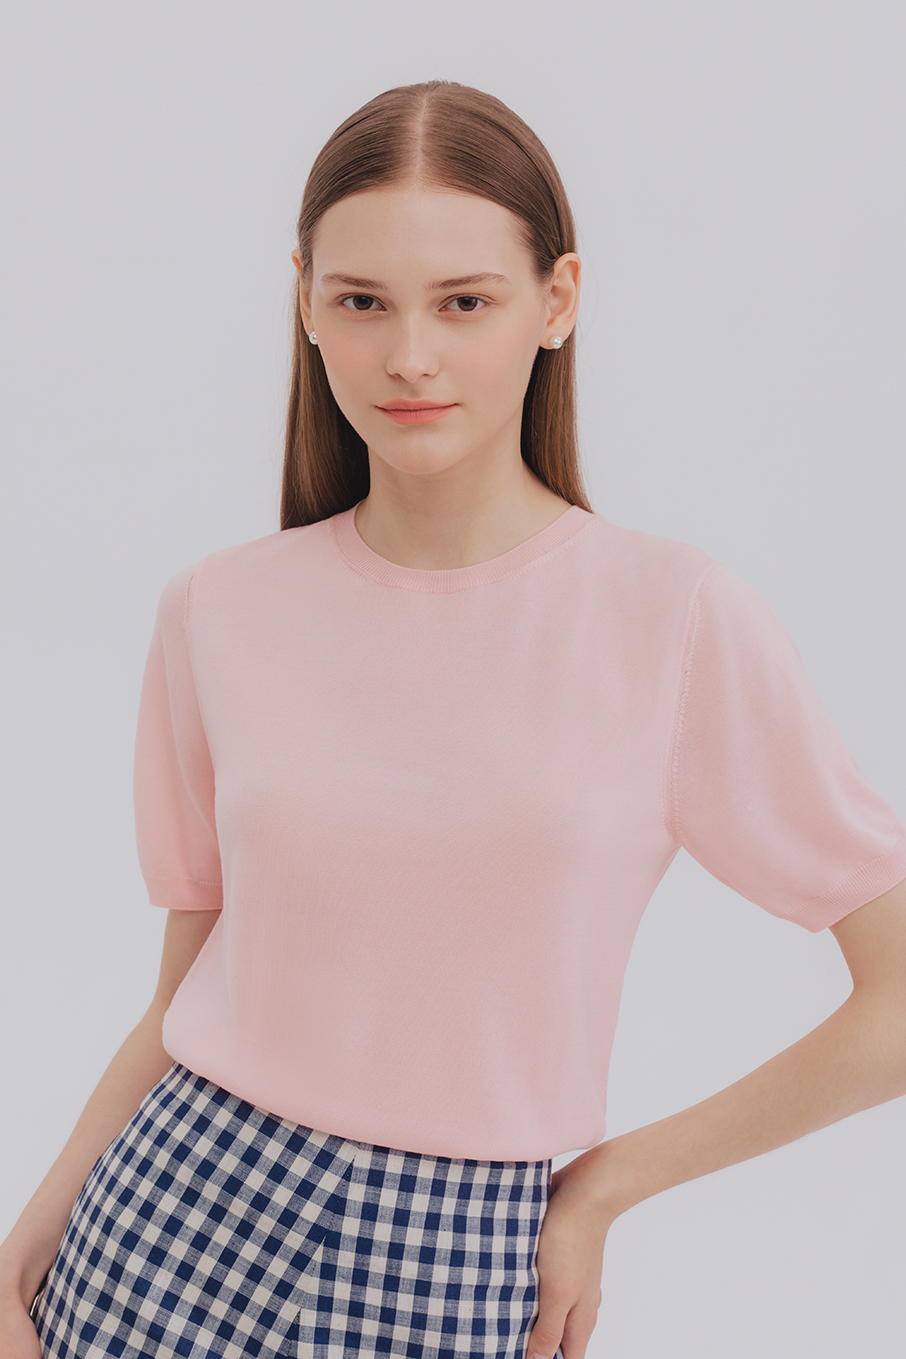 Rorier knit top (Pink)